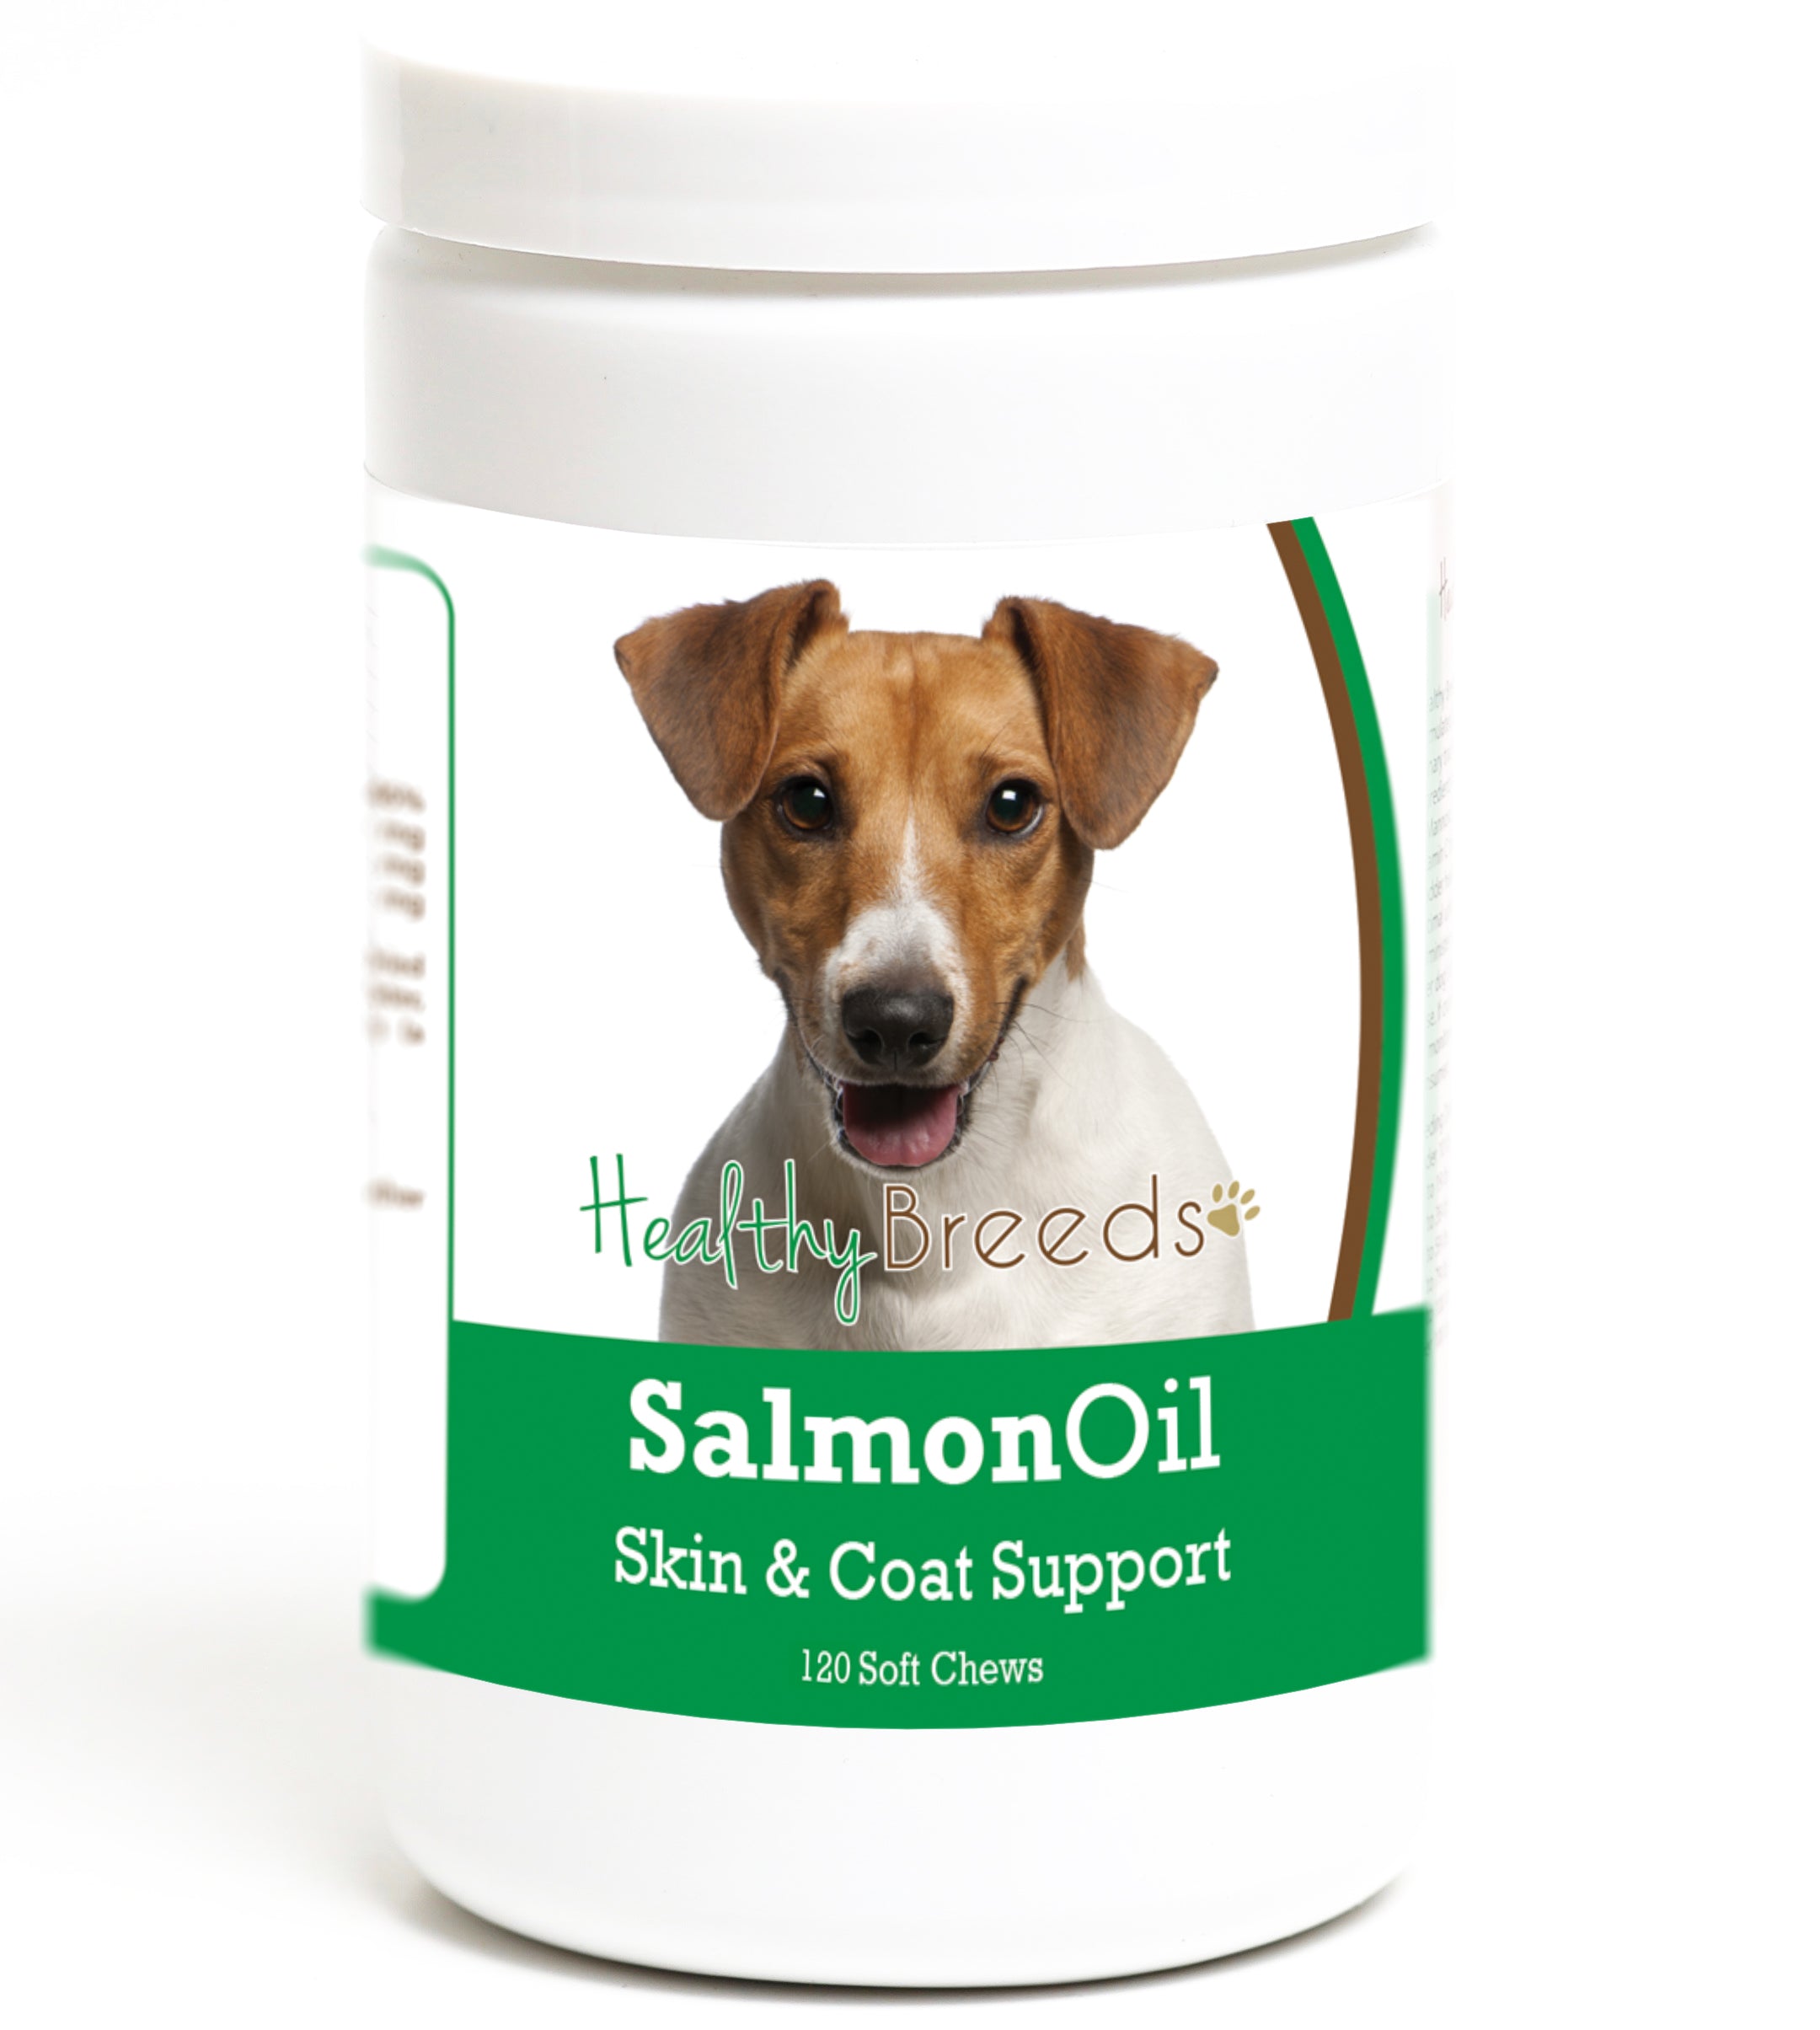 Jack Russell Terrier Salmon Oil Soft Chews 120 Count